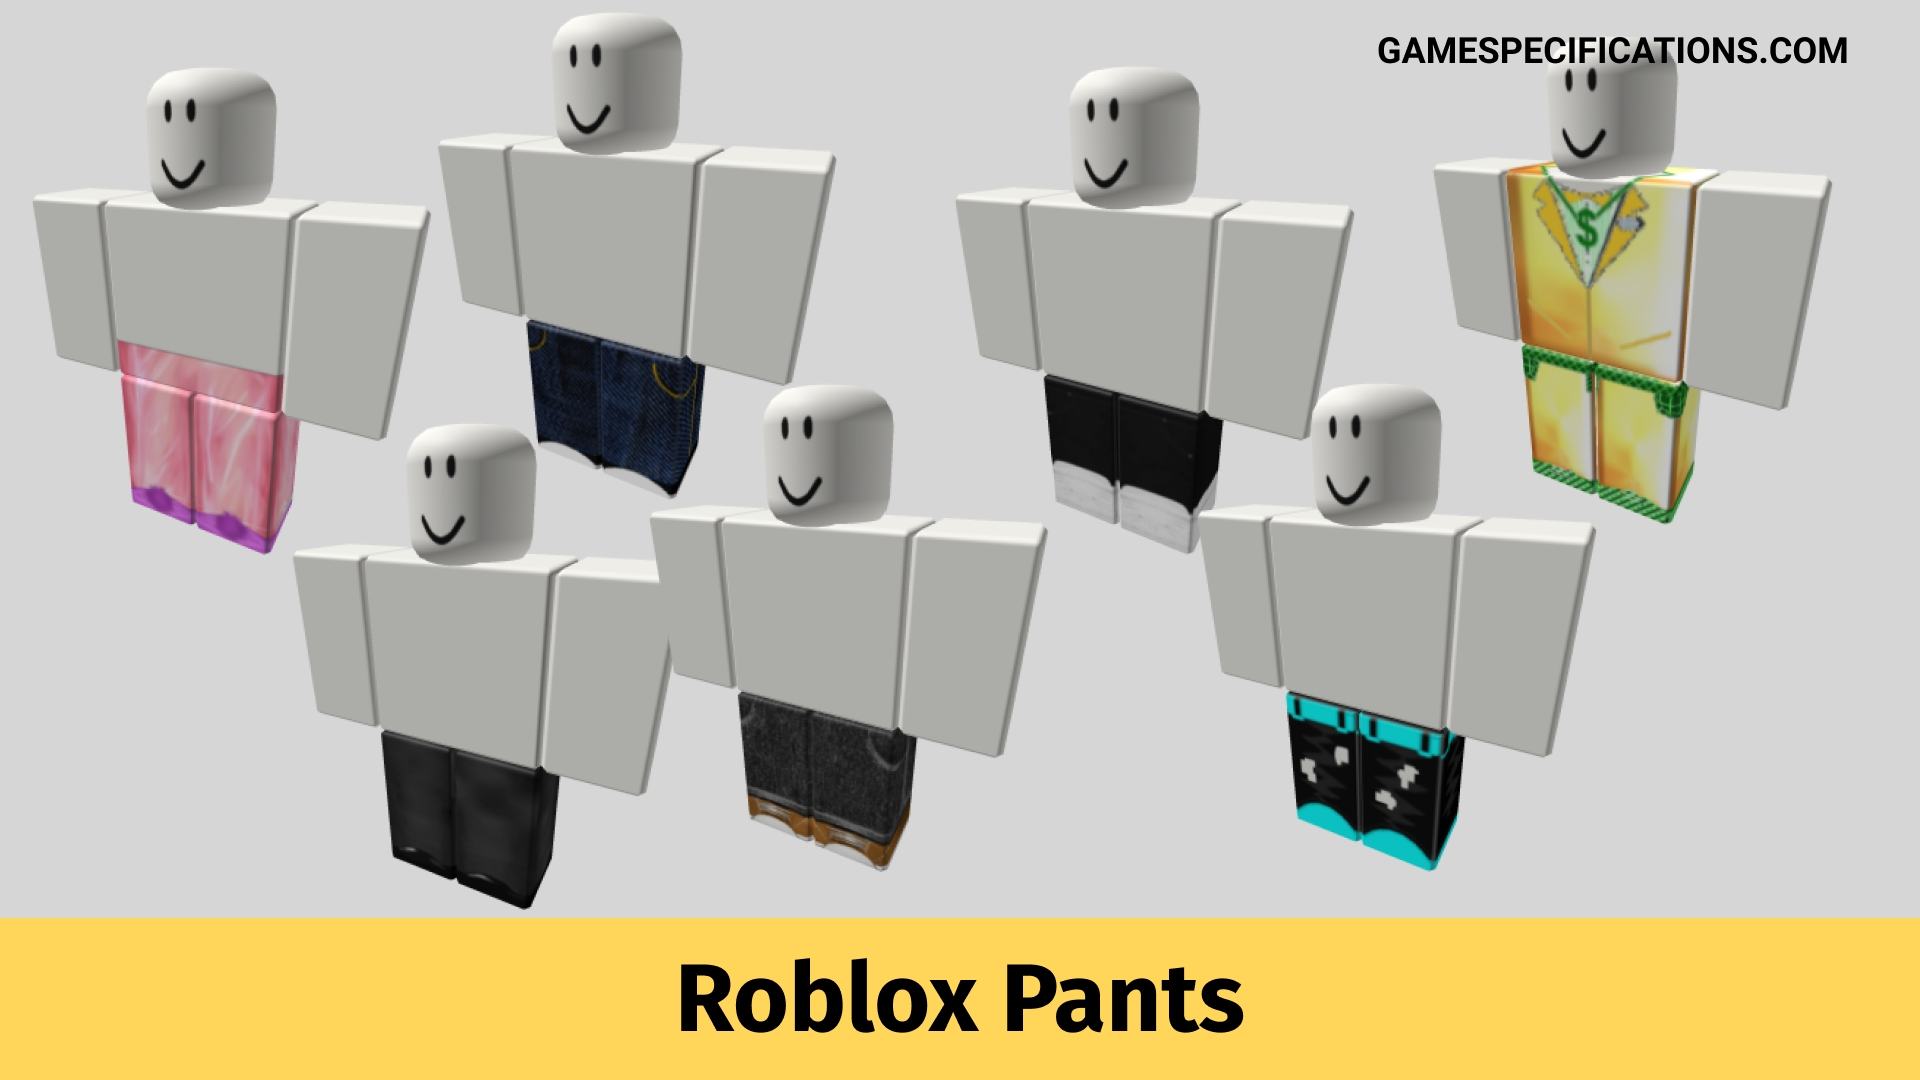 Top 23 Roblox Pants Of All Time Free Aesthetic And Best Selling Game Specifications - pants of roblox